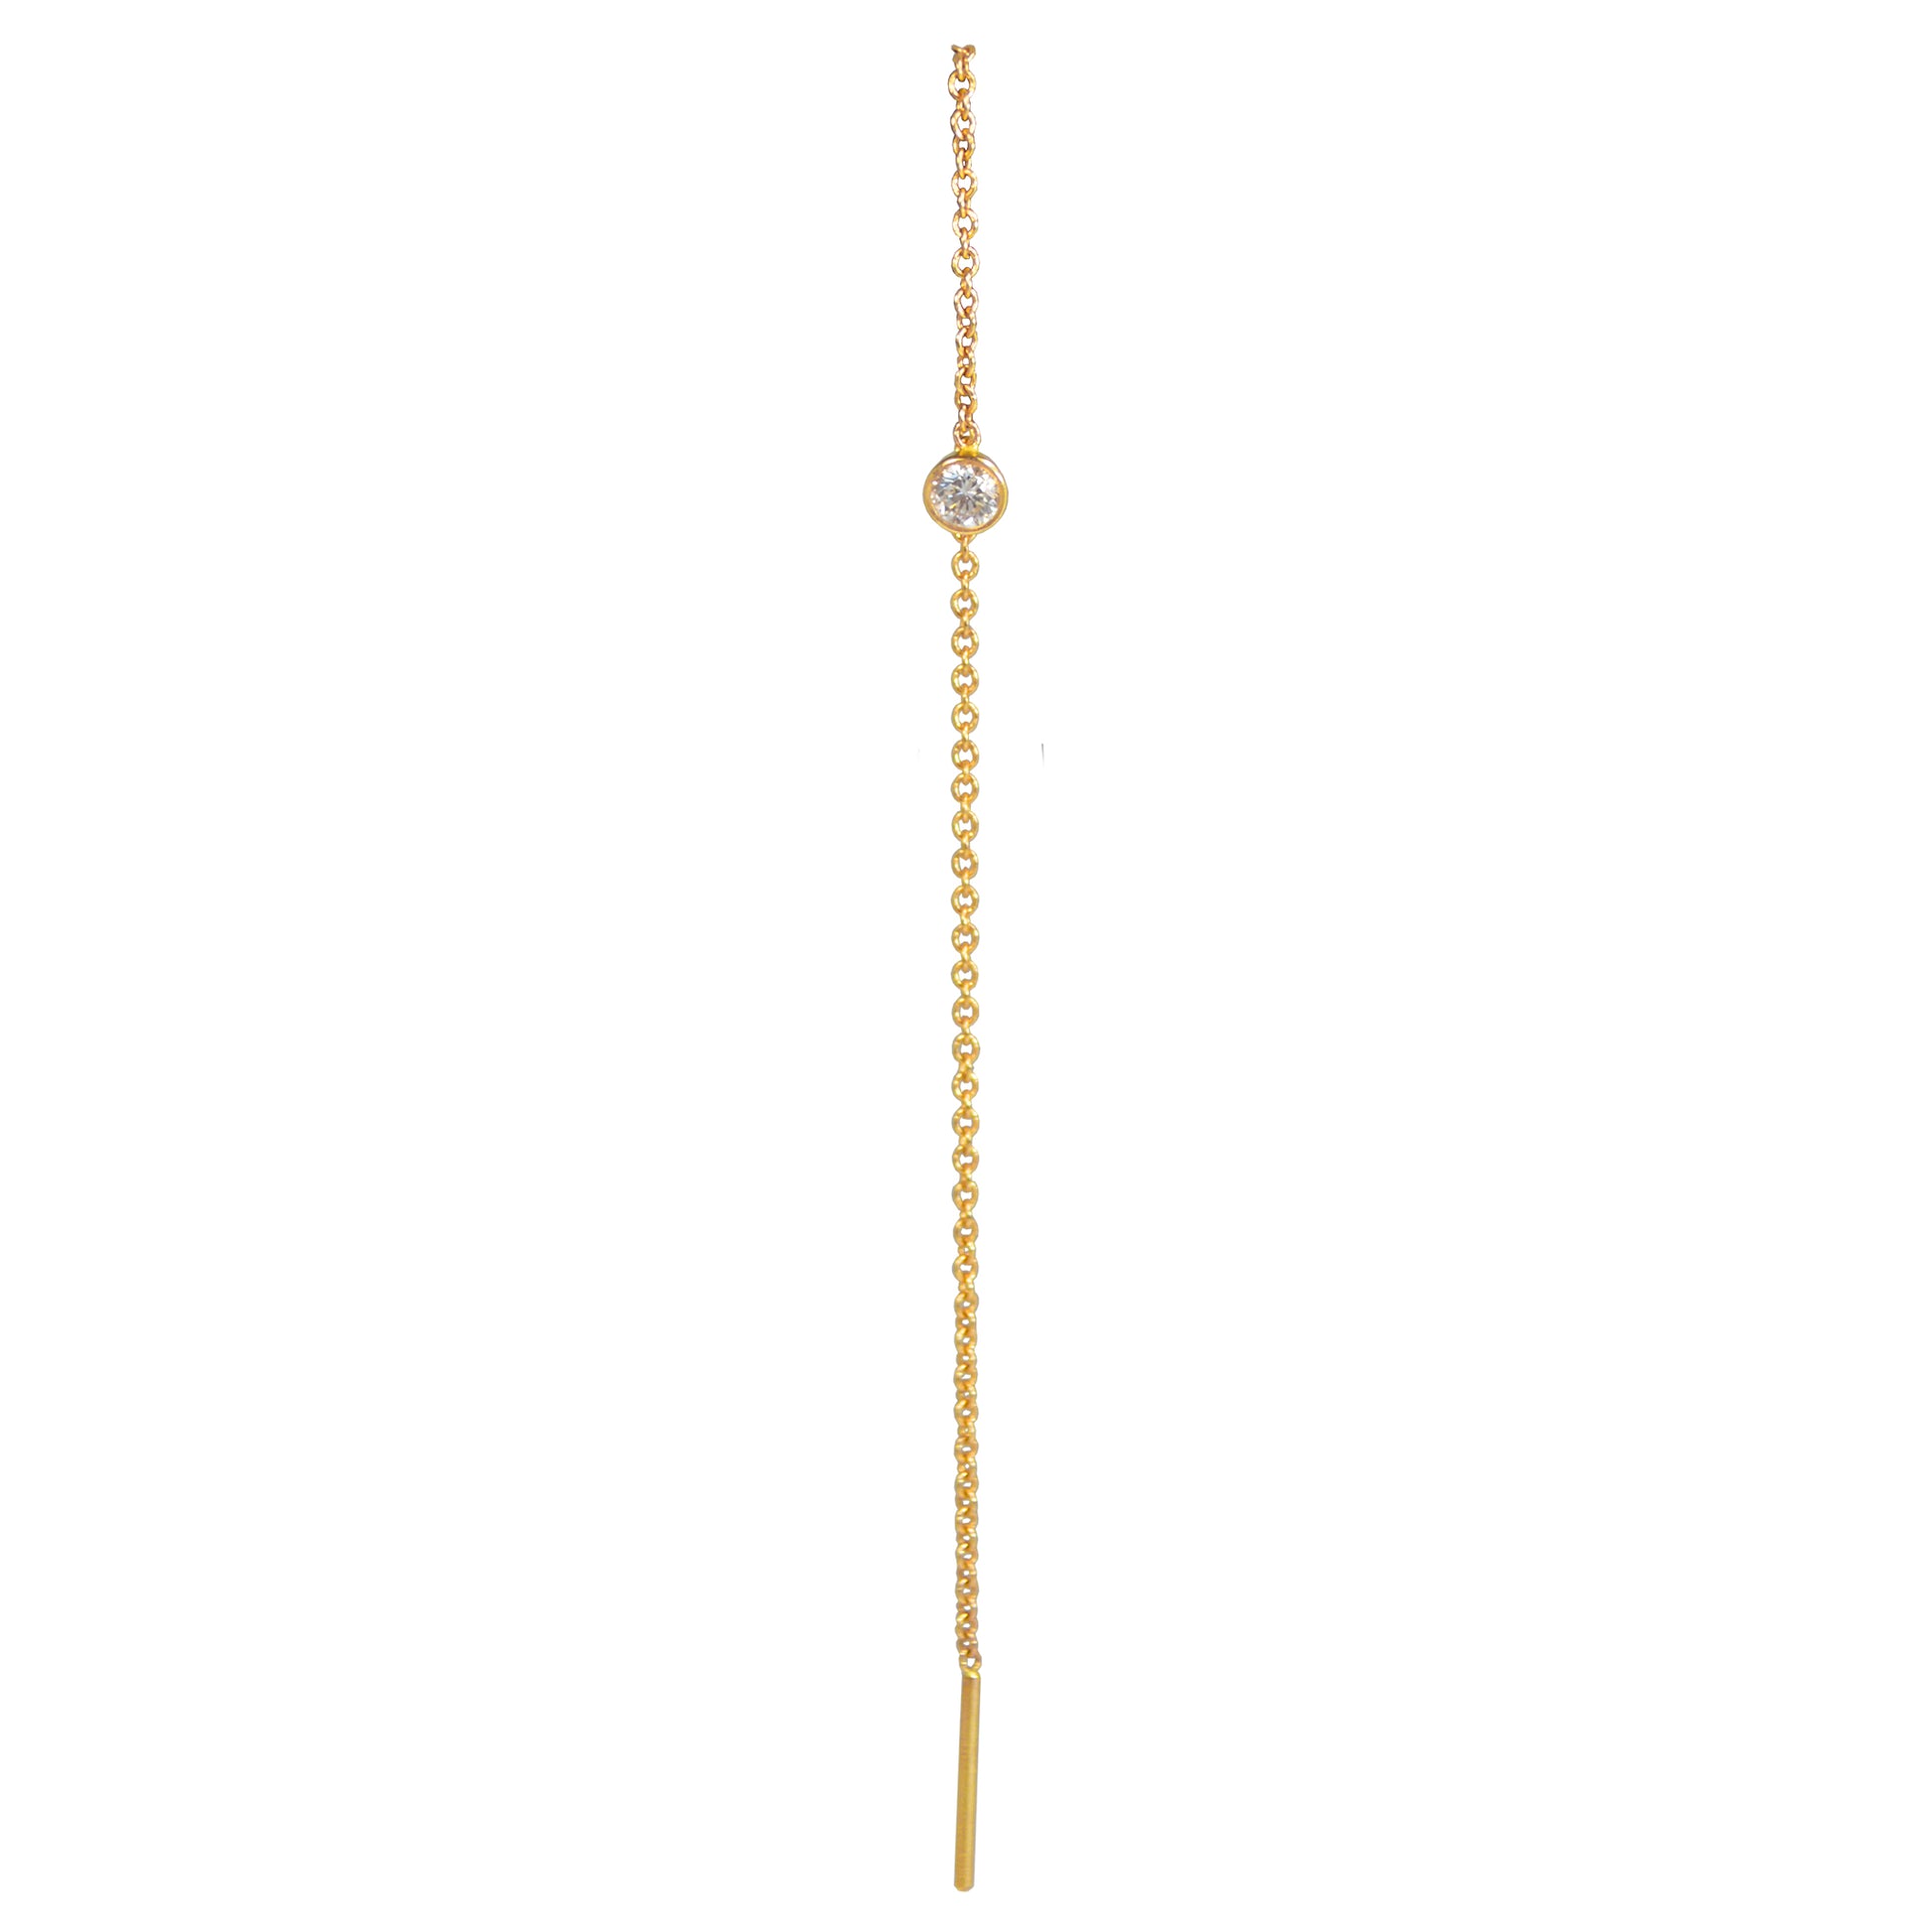 Lucia Diamond Lariat Earring Front View